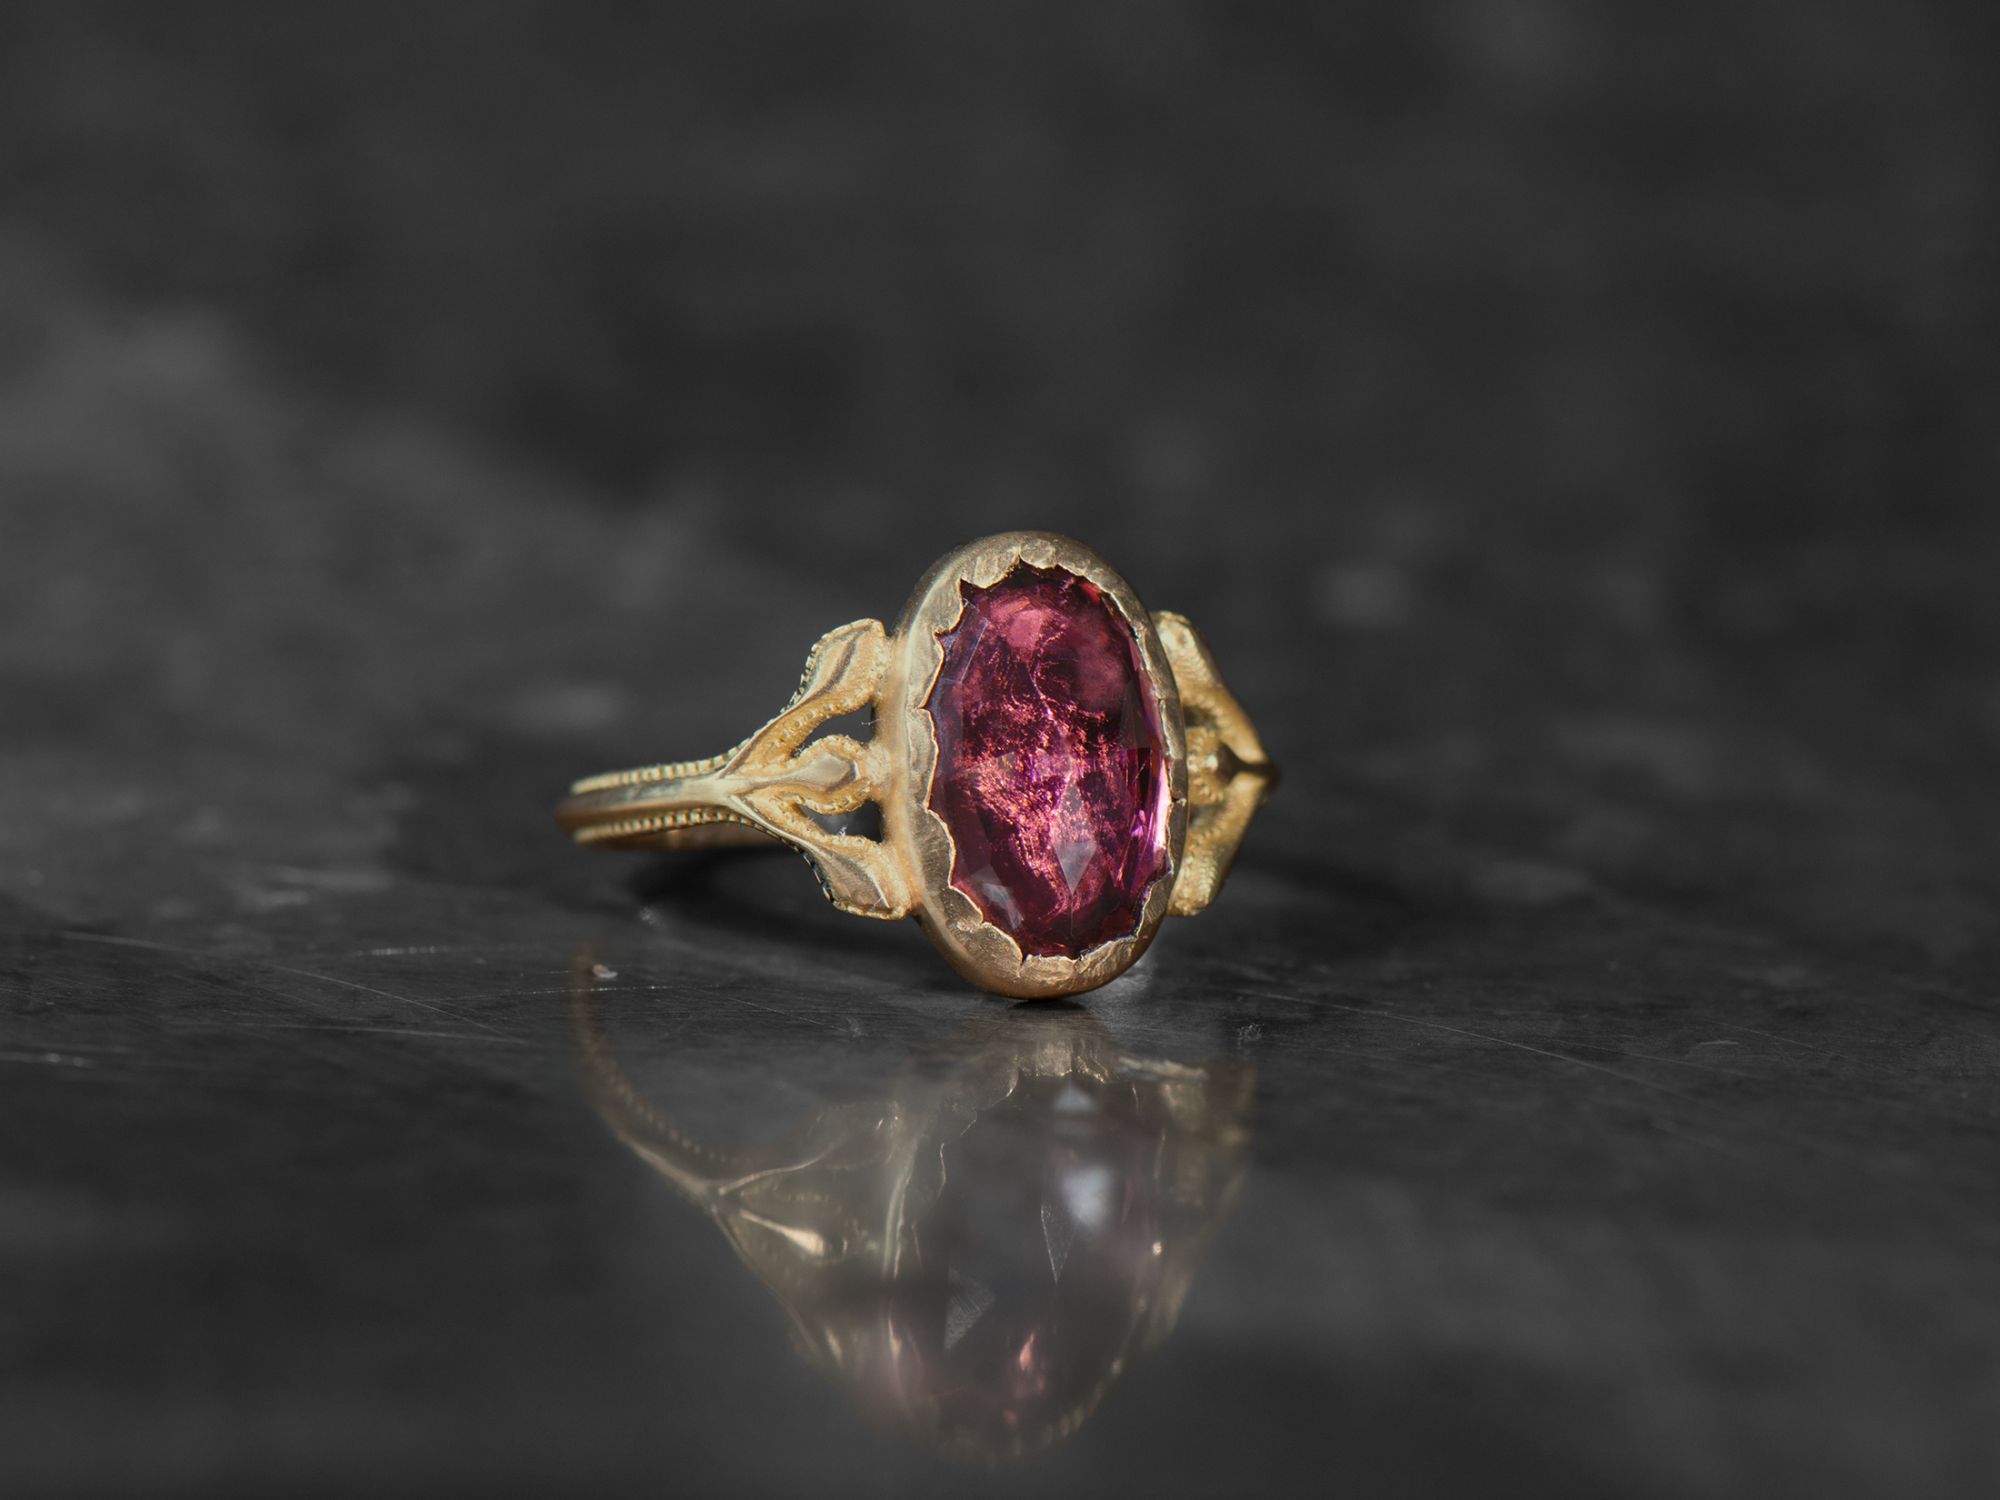 Baby Diane 2,33cts oval rose tourmaline and yellow gold ring by Emmanuelle Zysman